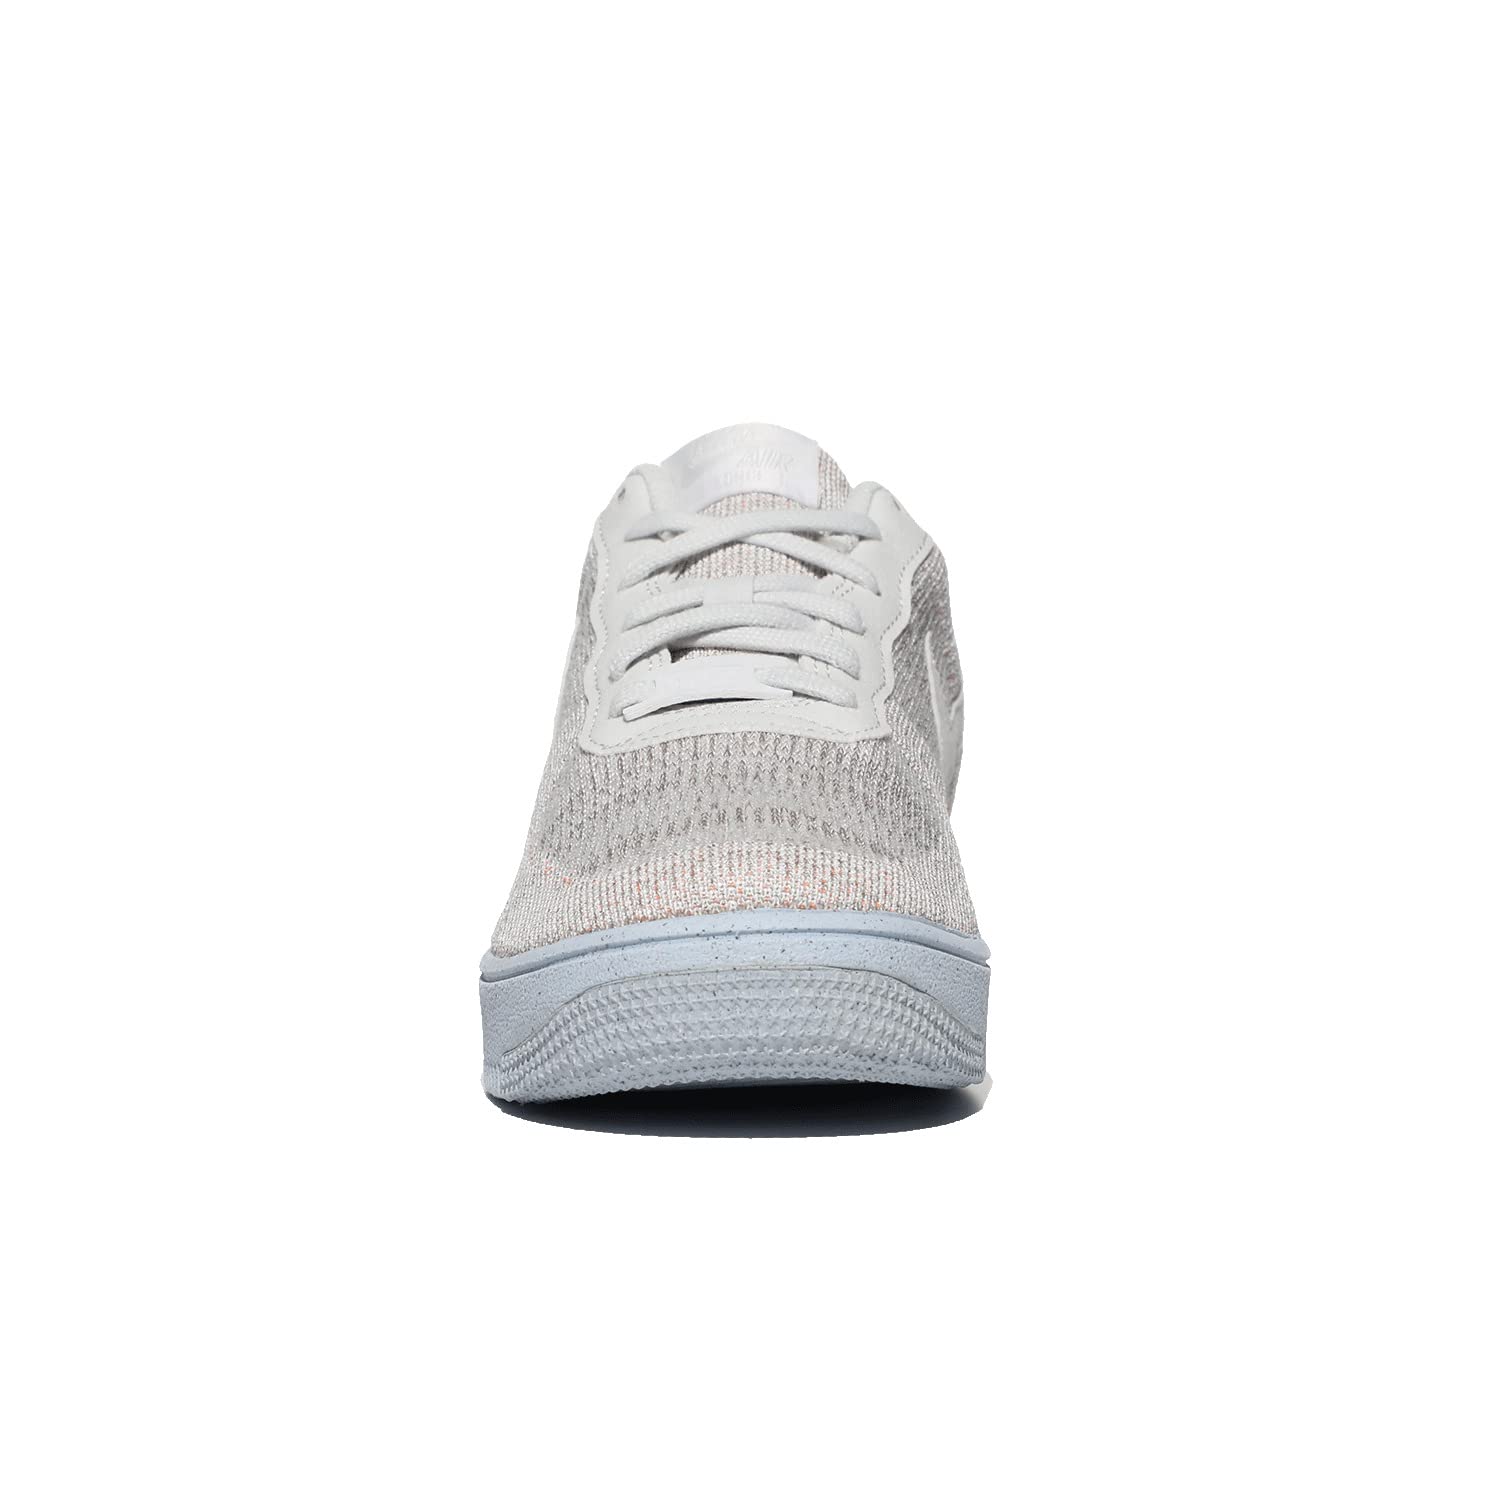 Image 6 of Air Force 1 Crater Flyknit (Big Kid)